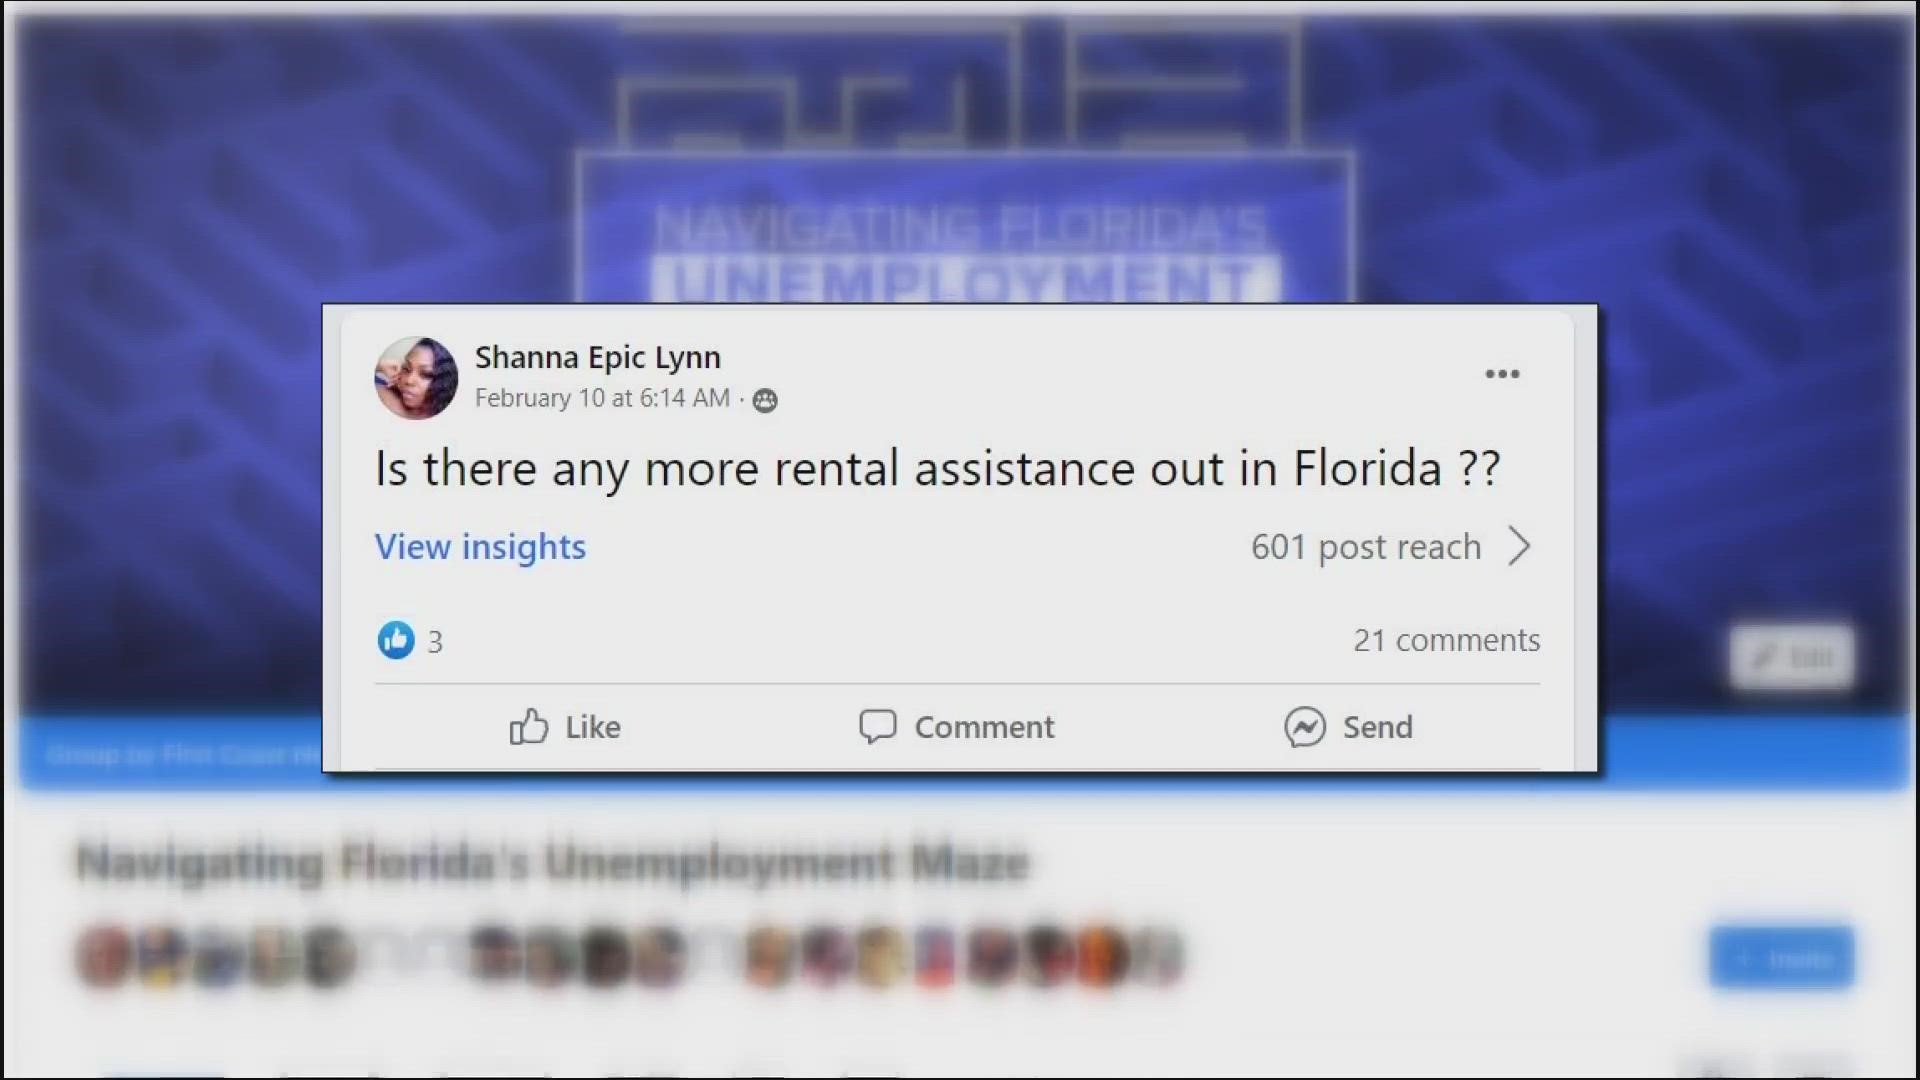 Yes, there are still rental assistance programs open